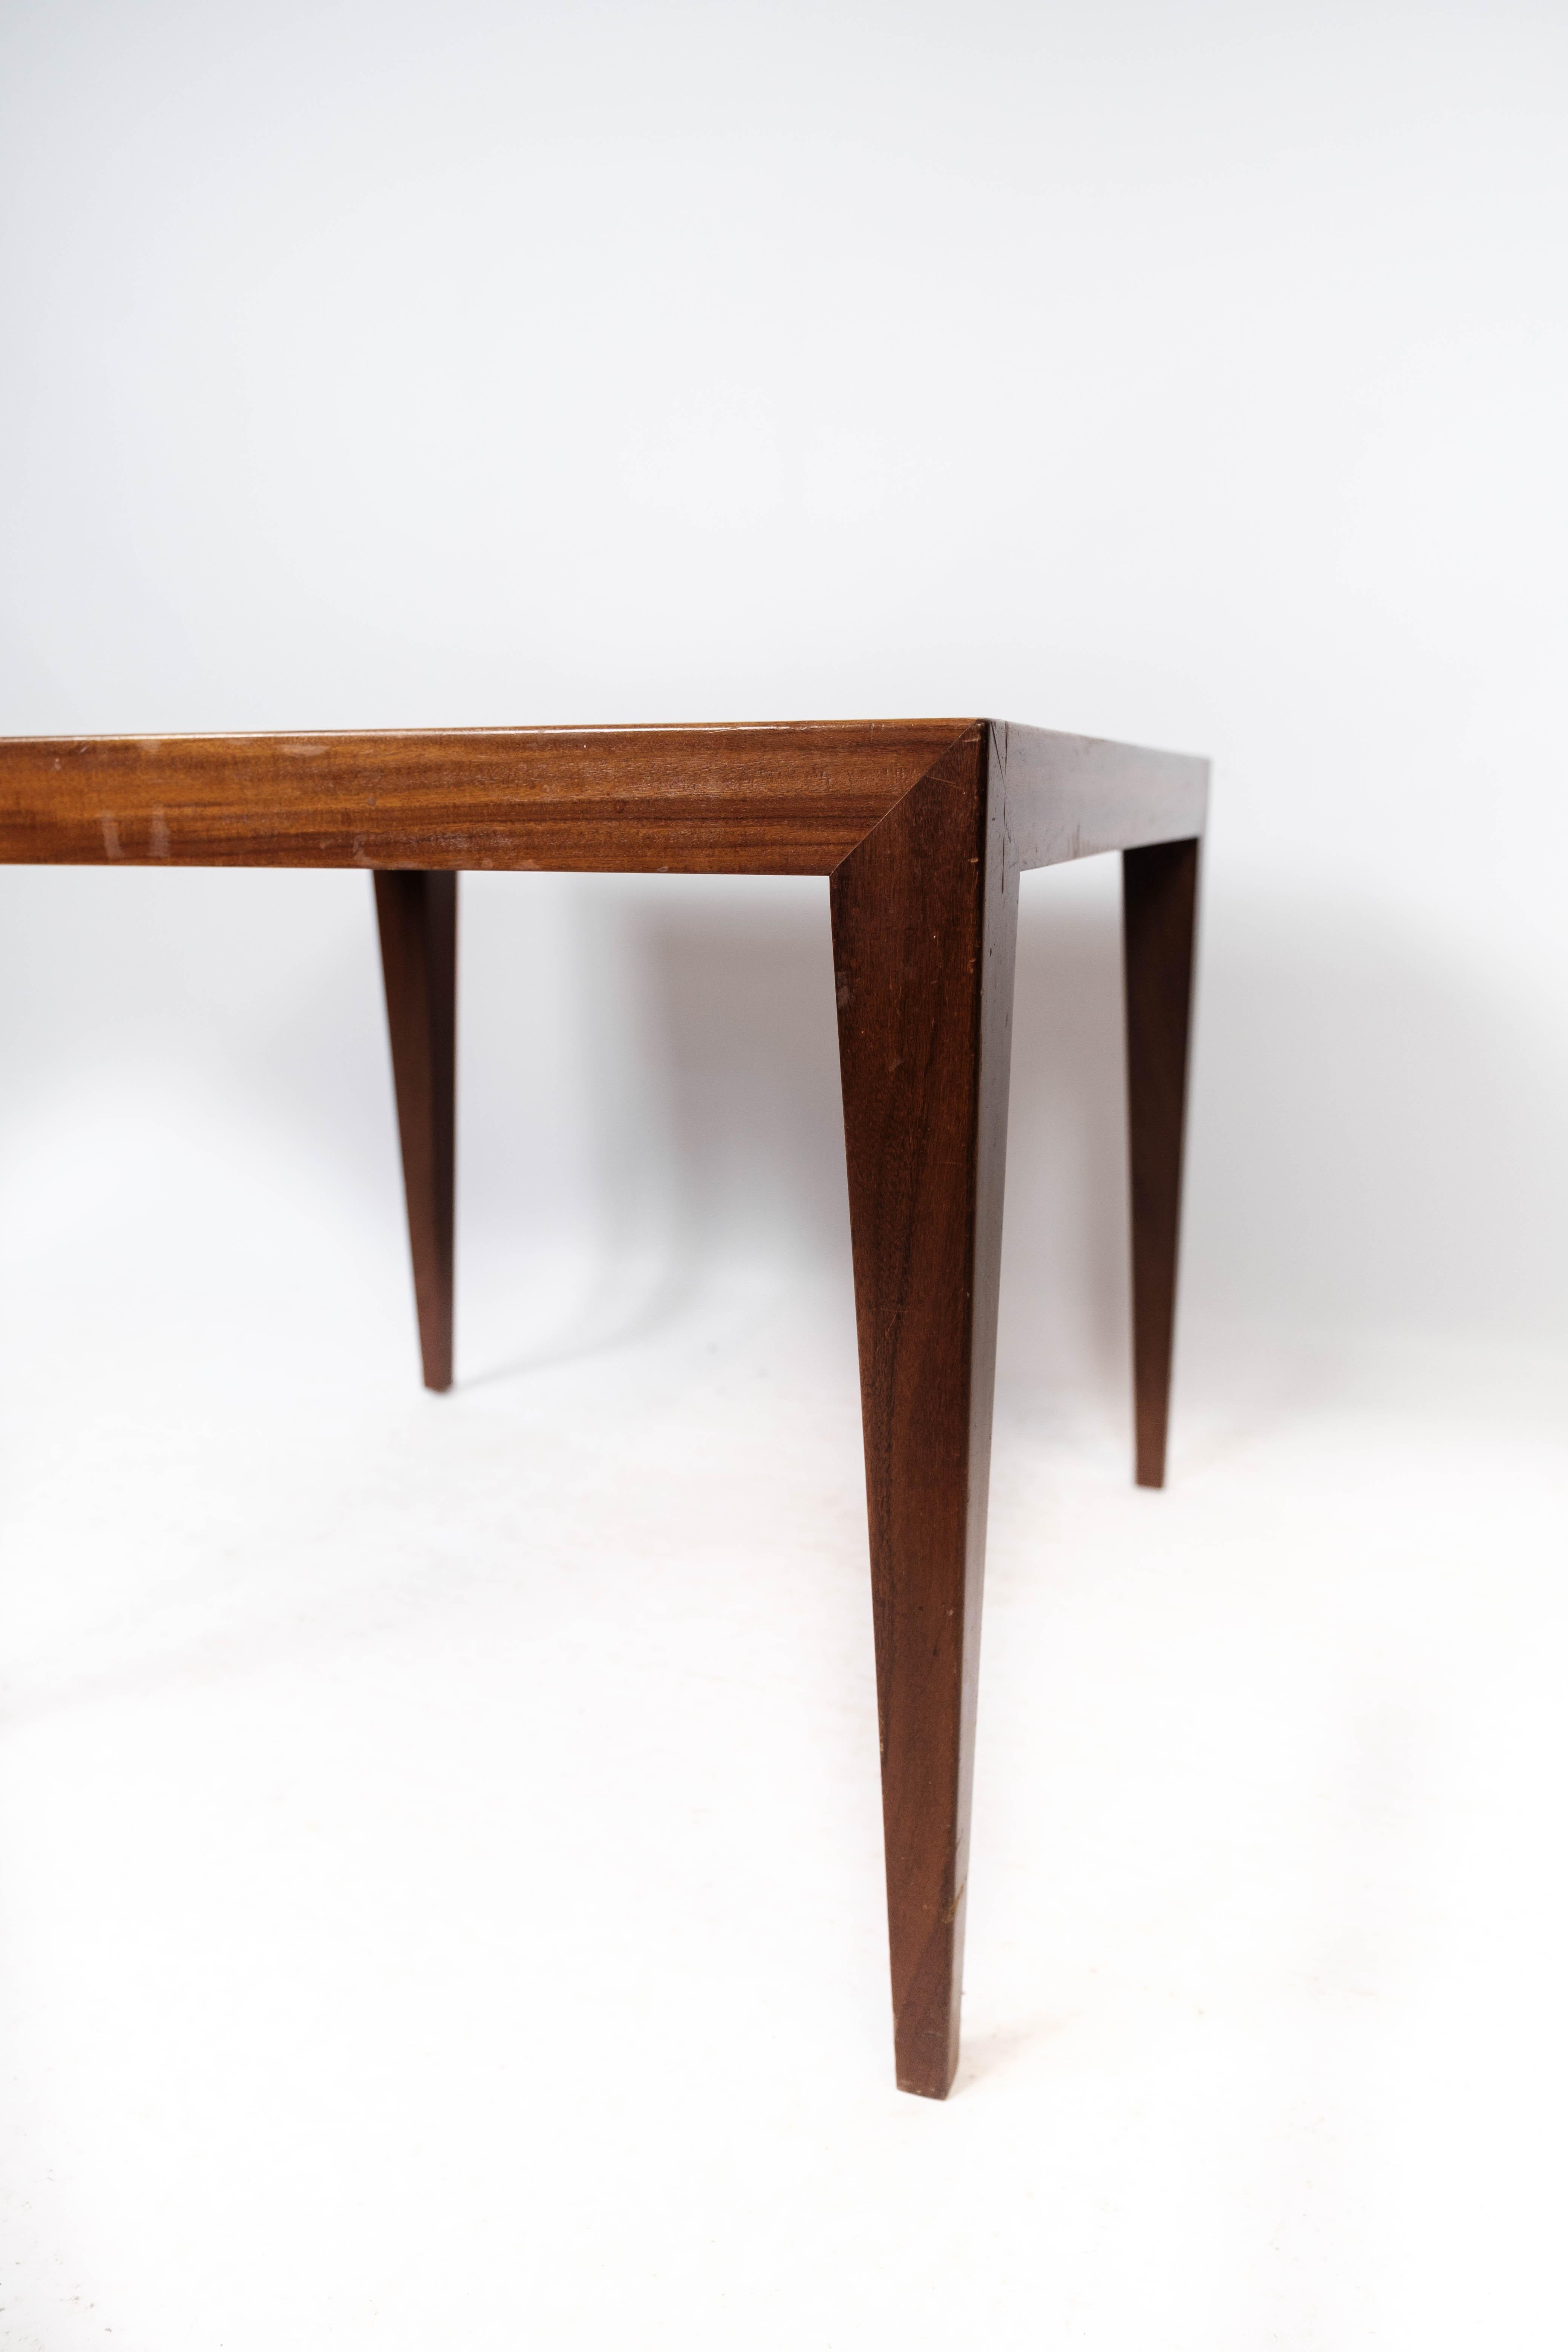 Mid-20th Century Side Table in Teak of Danish Design Manufactured by Haslev Furniture, 1960s For Sale